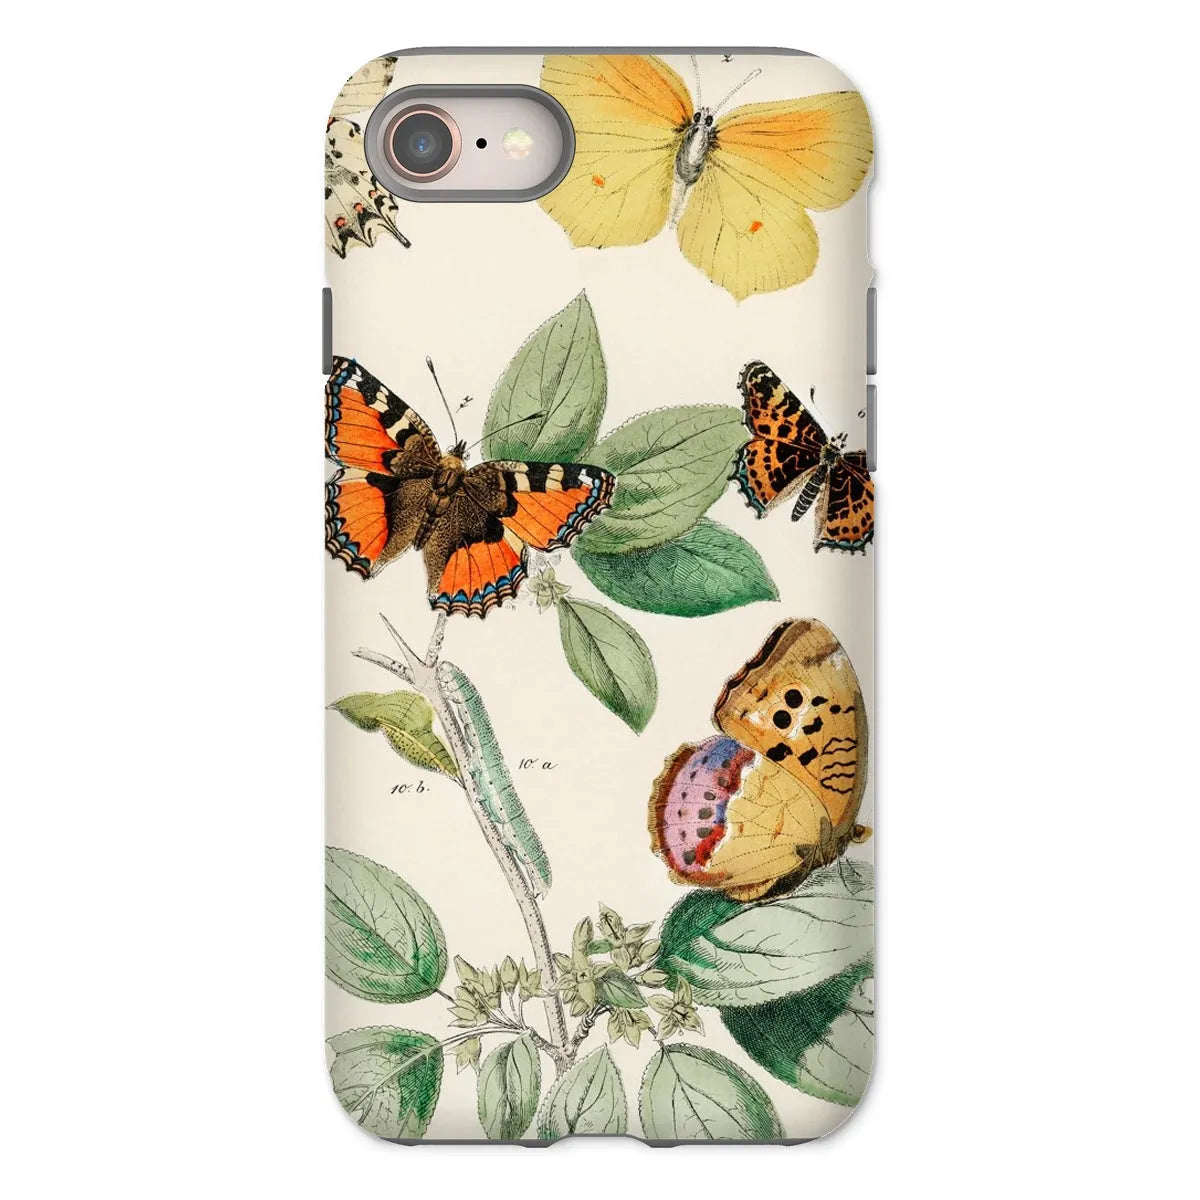 Butterfly Aesthetic Art Phone Case - William Forsell Kirby - Iphone 8 / Matte - Mobile Phone Cases - Aesthetic Art